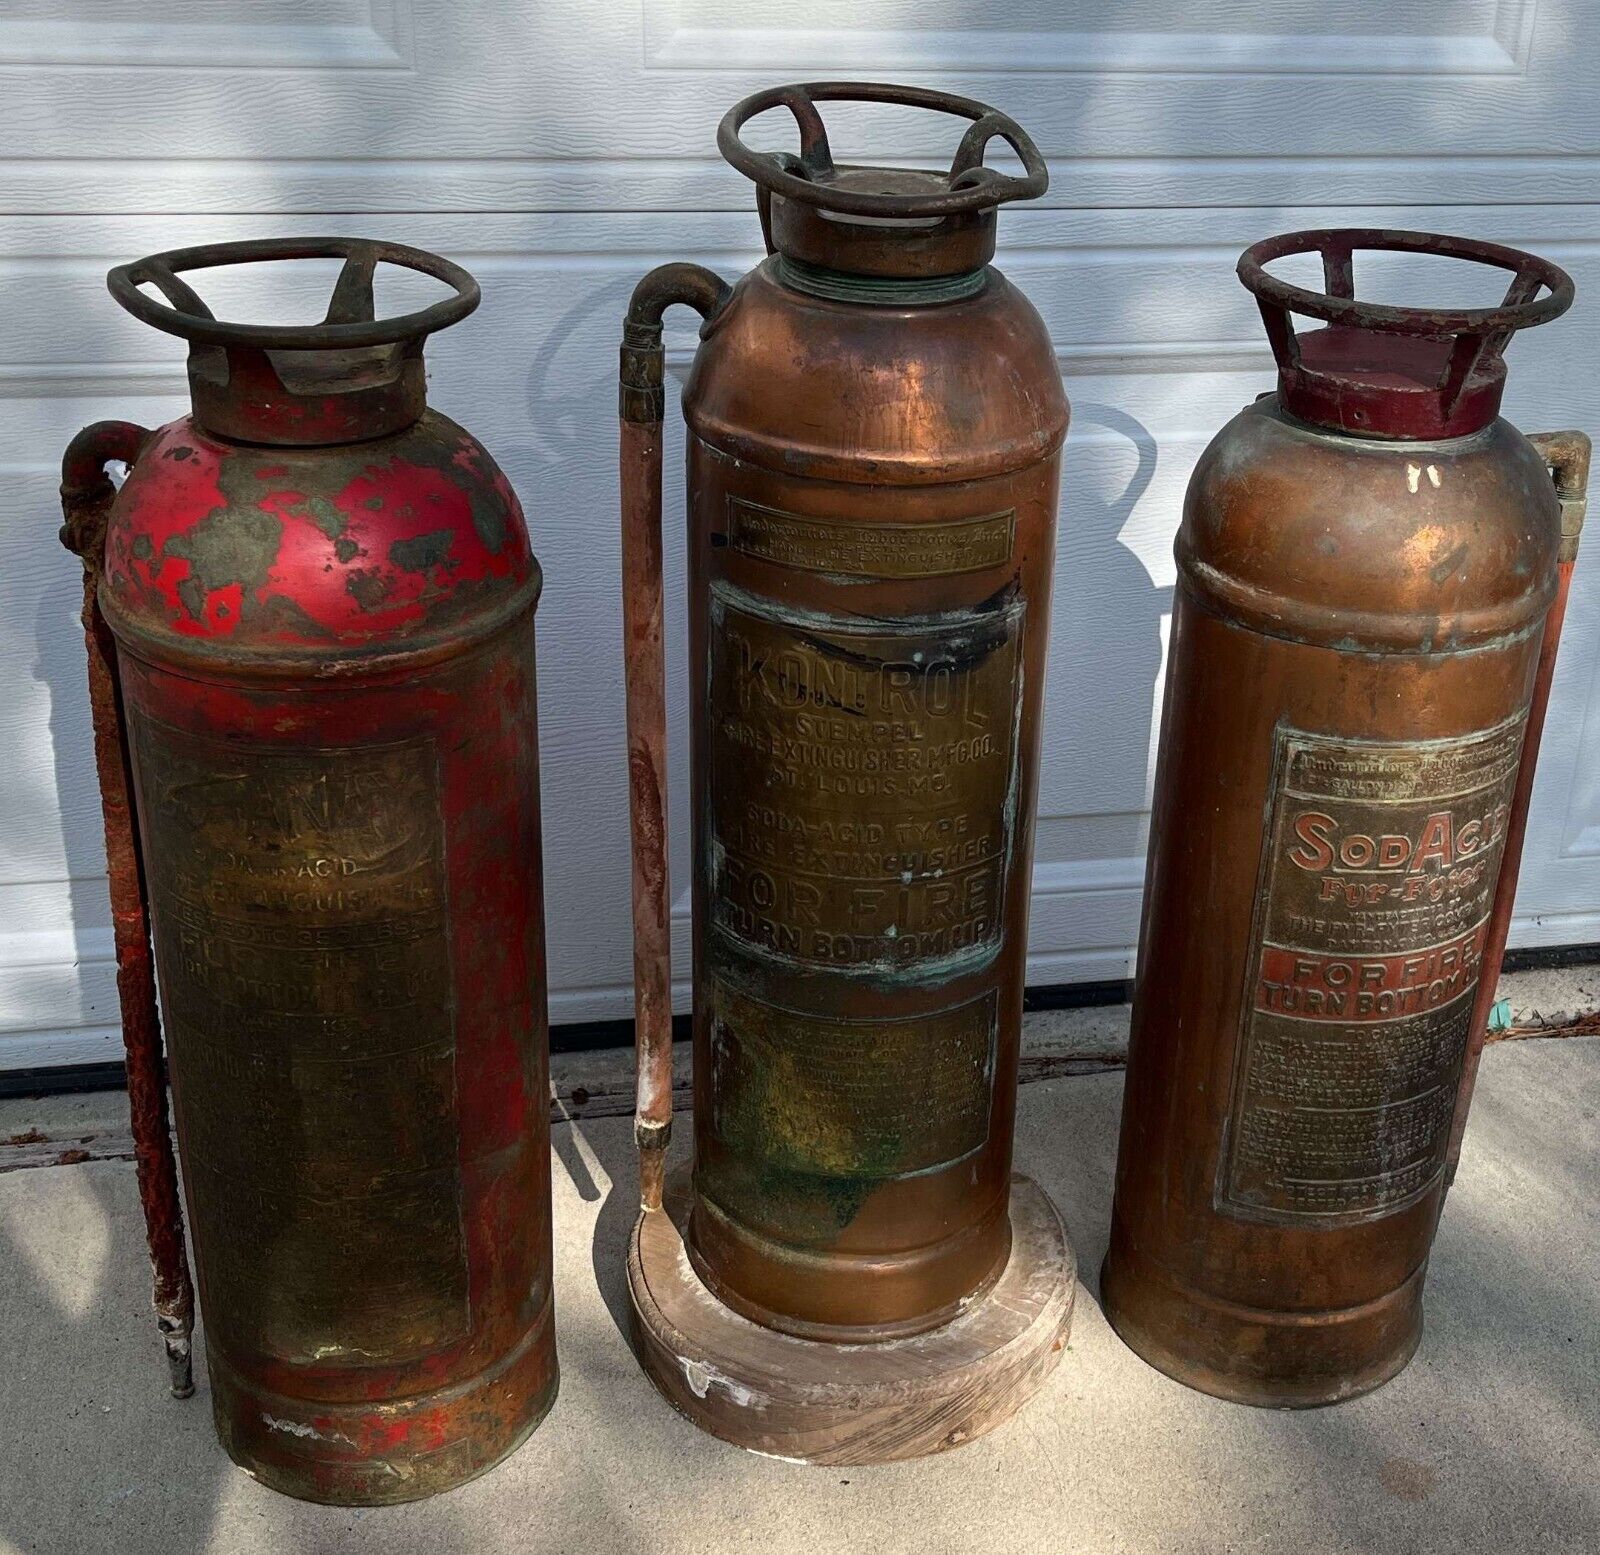 3 Vintage Brass Fire Extinguishers from the 40s and 50s